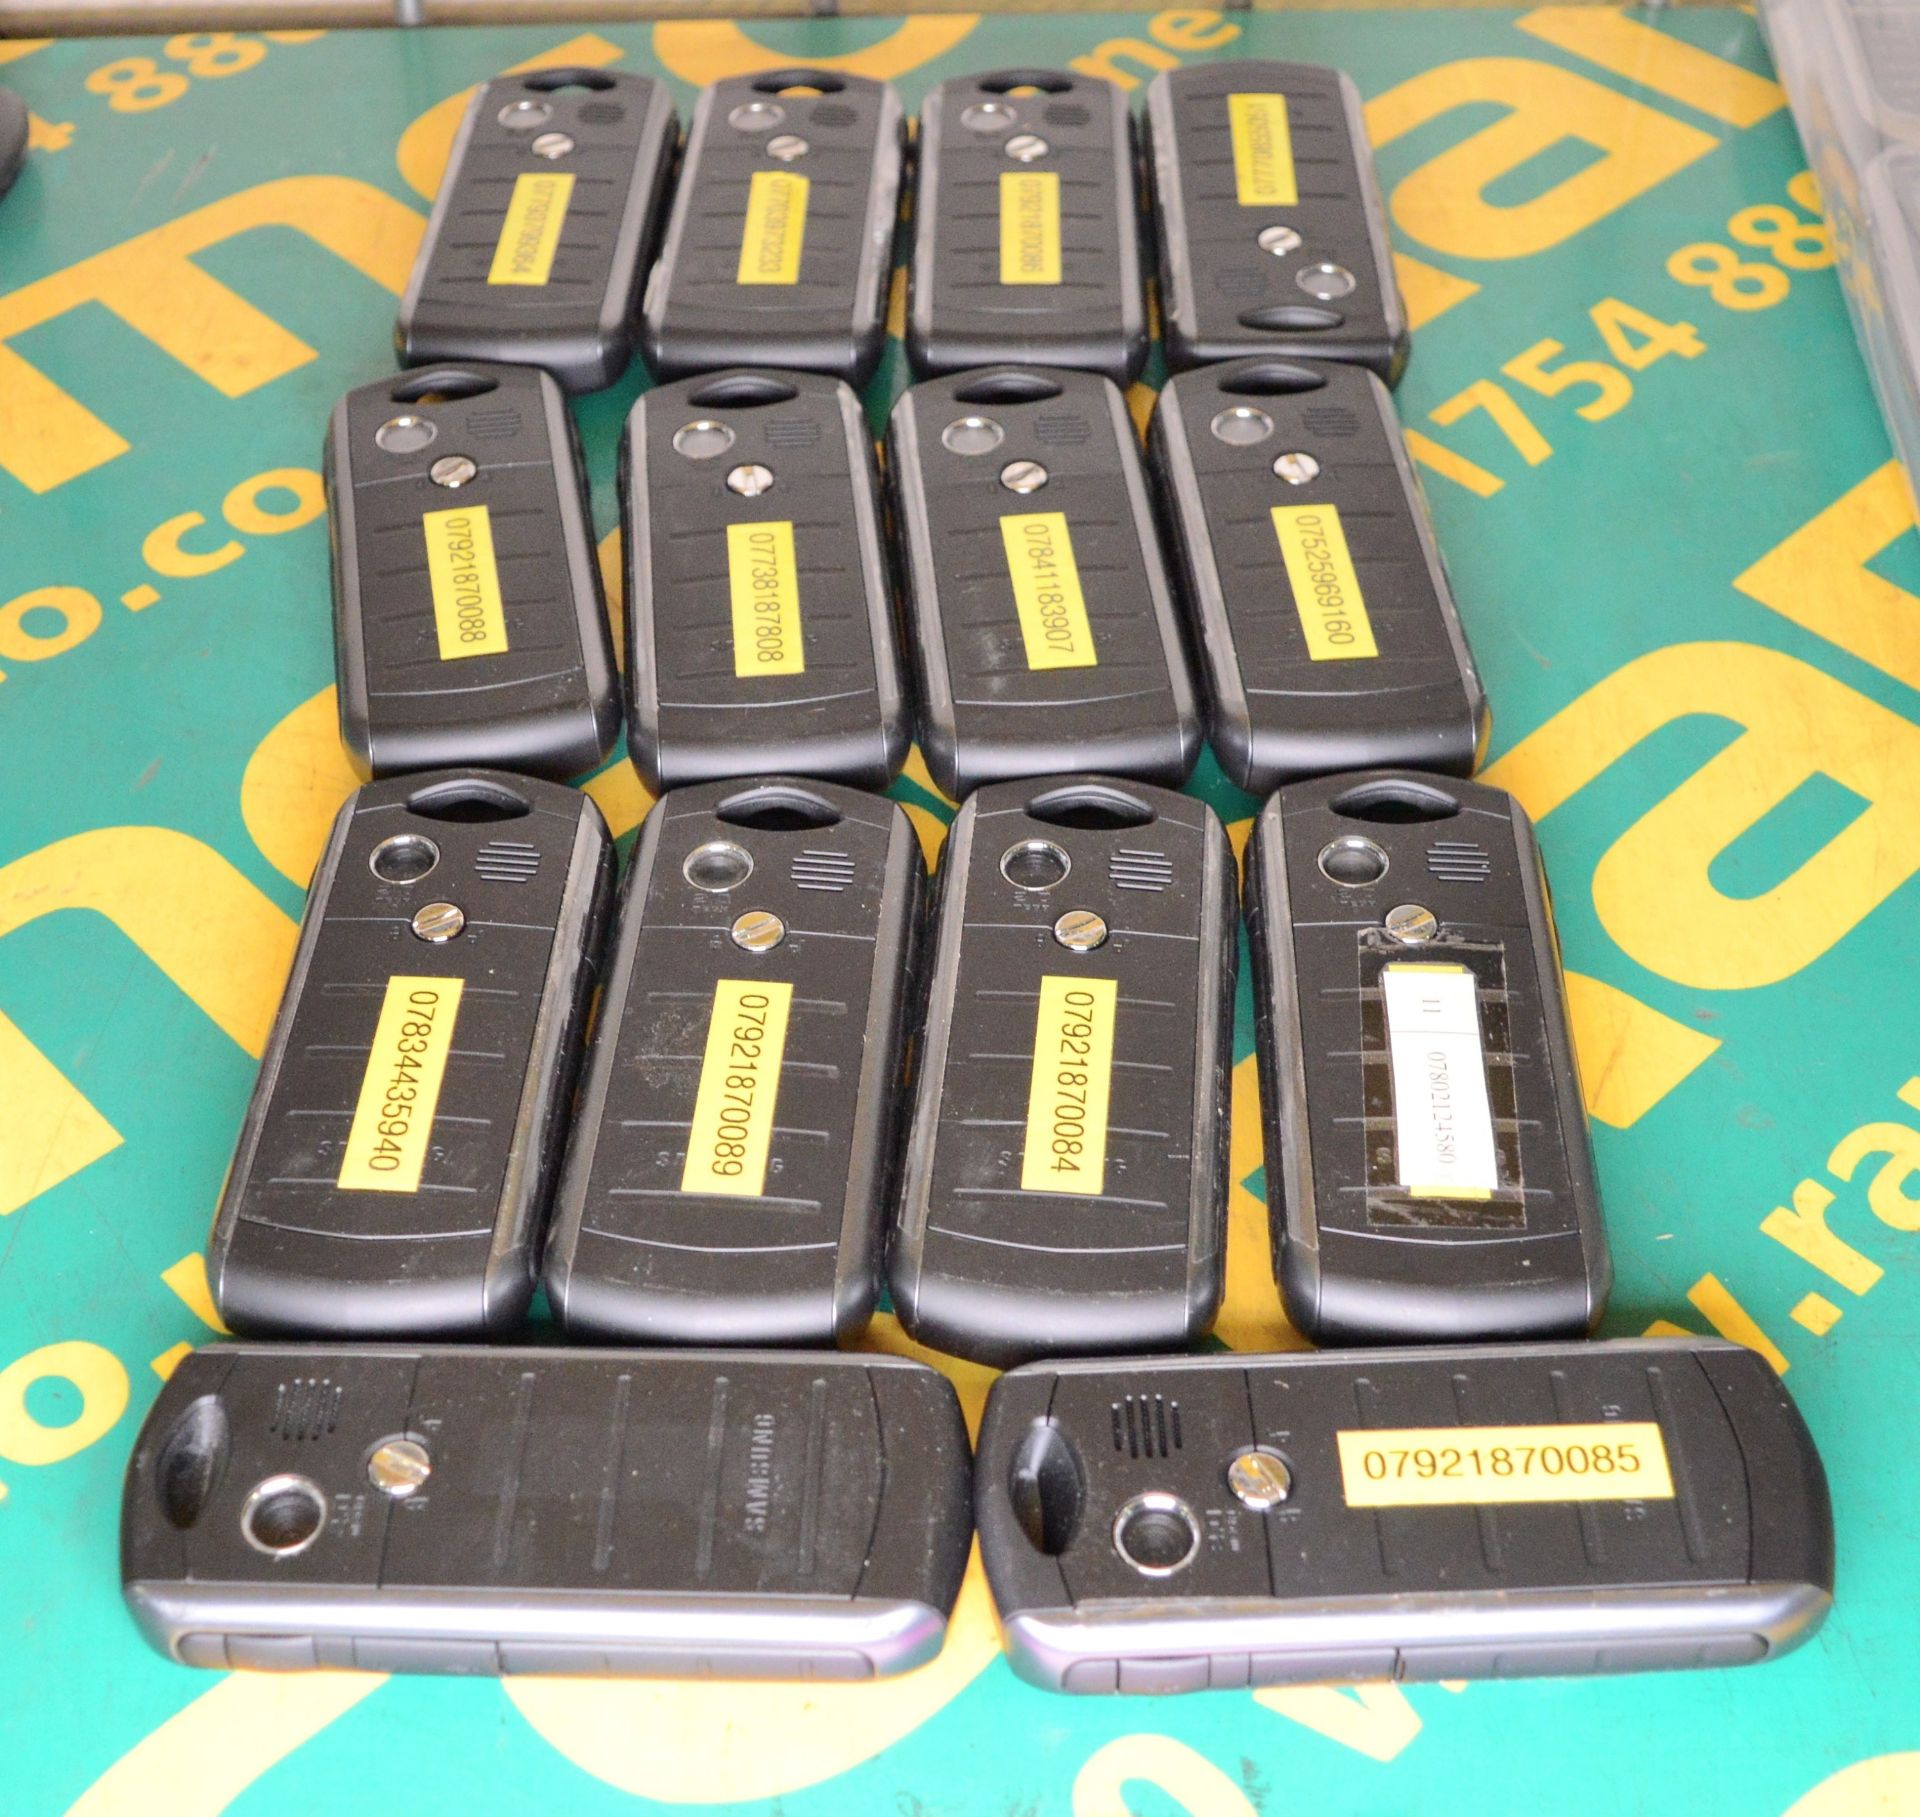 14x Samsung Mobile Phones - Batteries may be missing. - Image 2 of 2